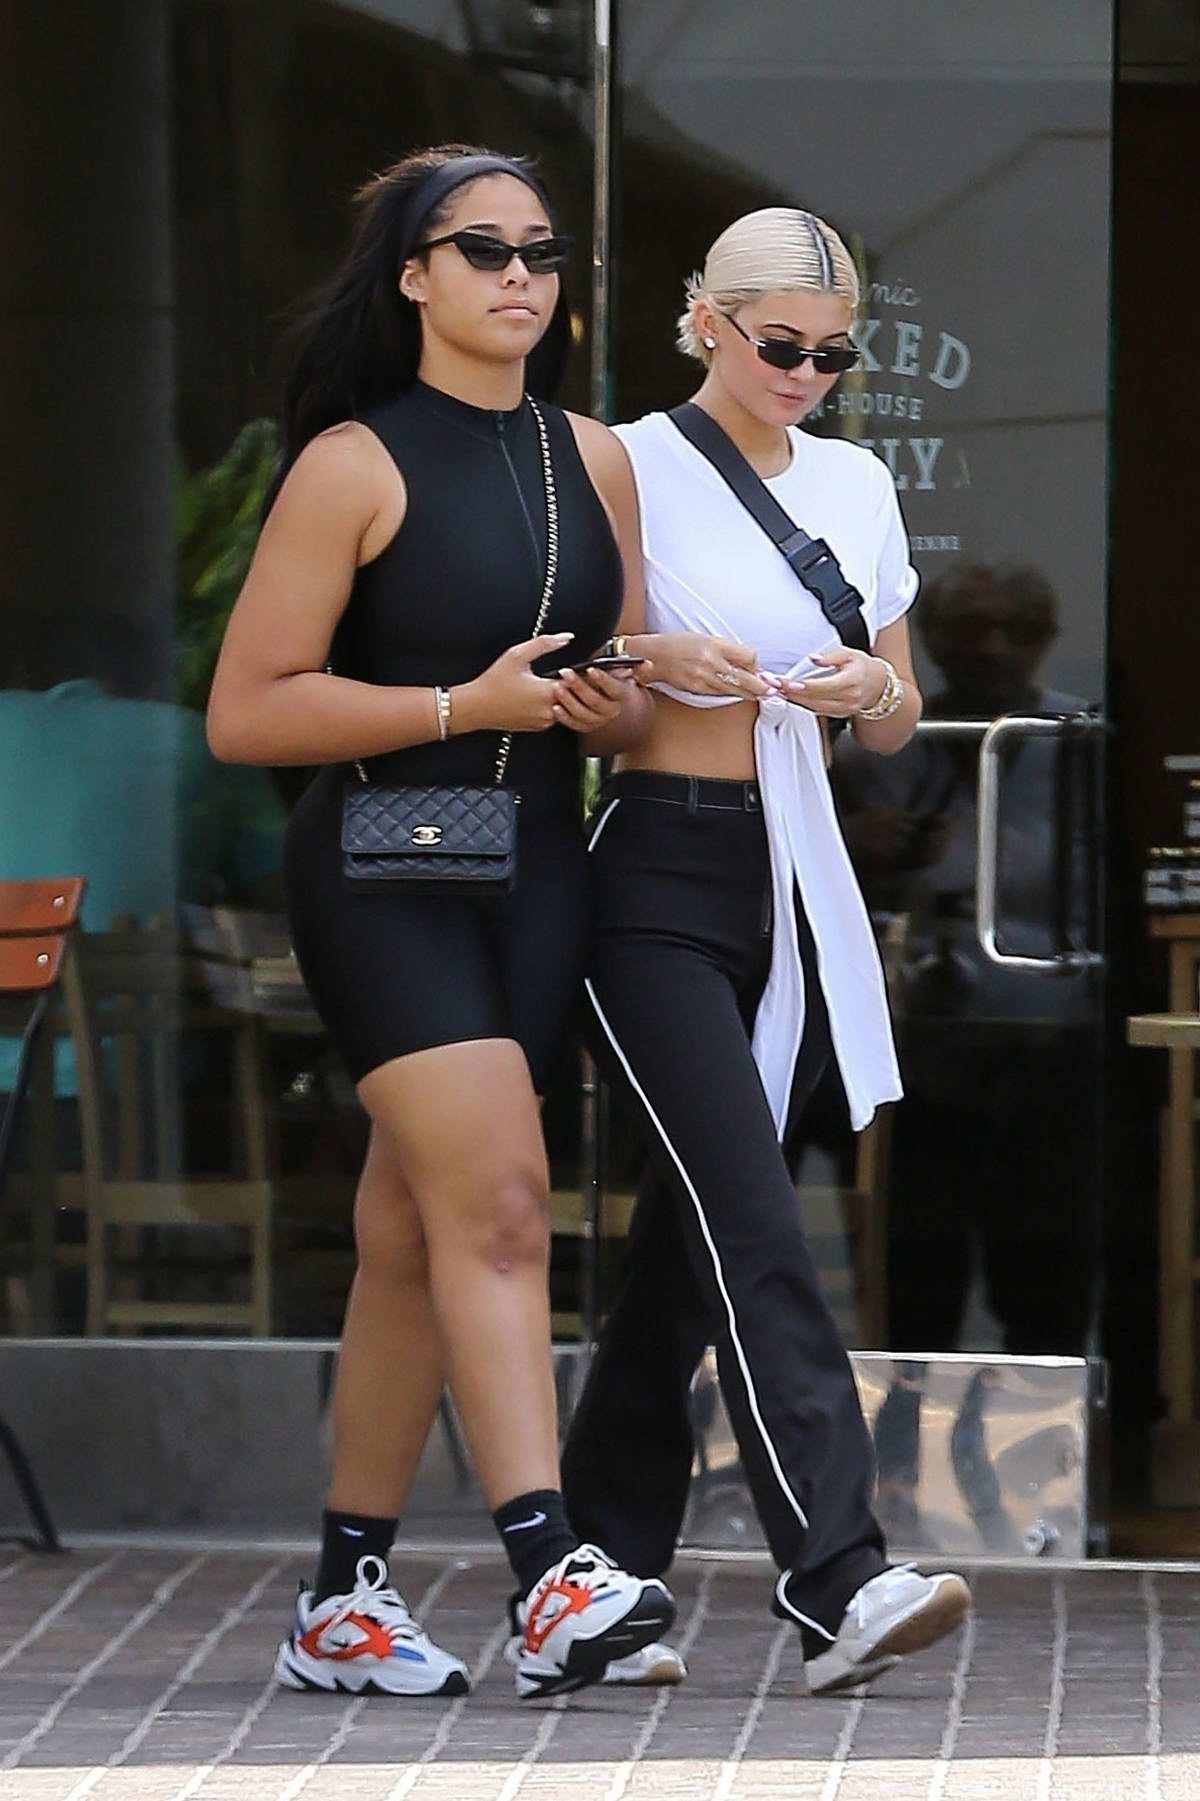 Kylie Jenner wore a white crop top, black pants and sneakers while